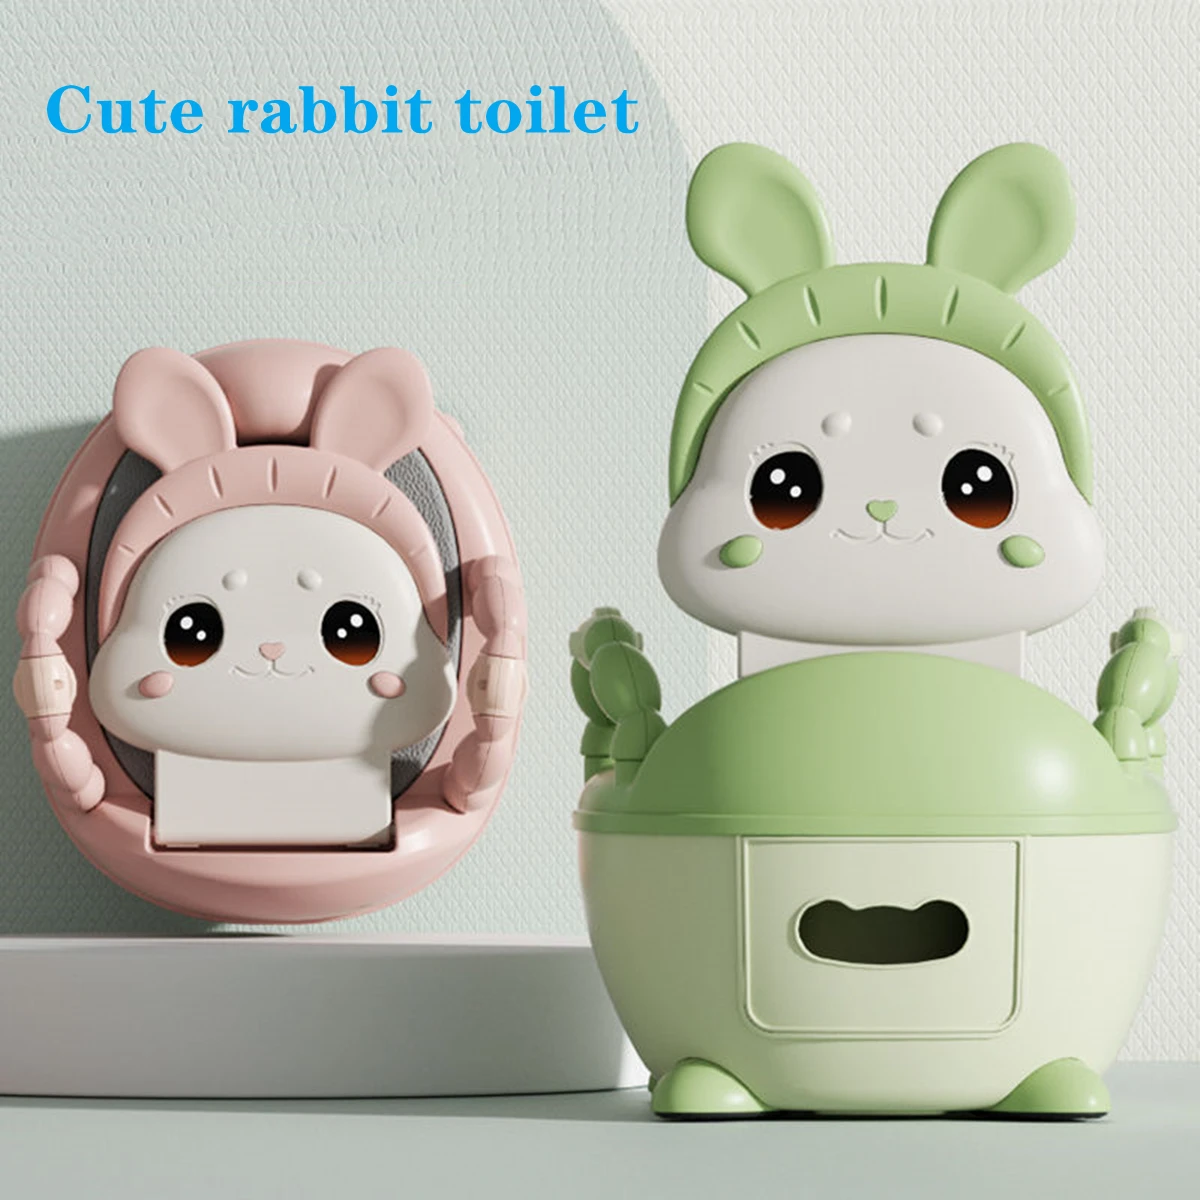 children's-pot-ergonomic-design-potty-chair-portable-cute-rabbit-baby-toilet-training-seat-child-perfect-gift-for-boys-and-girls